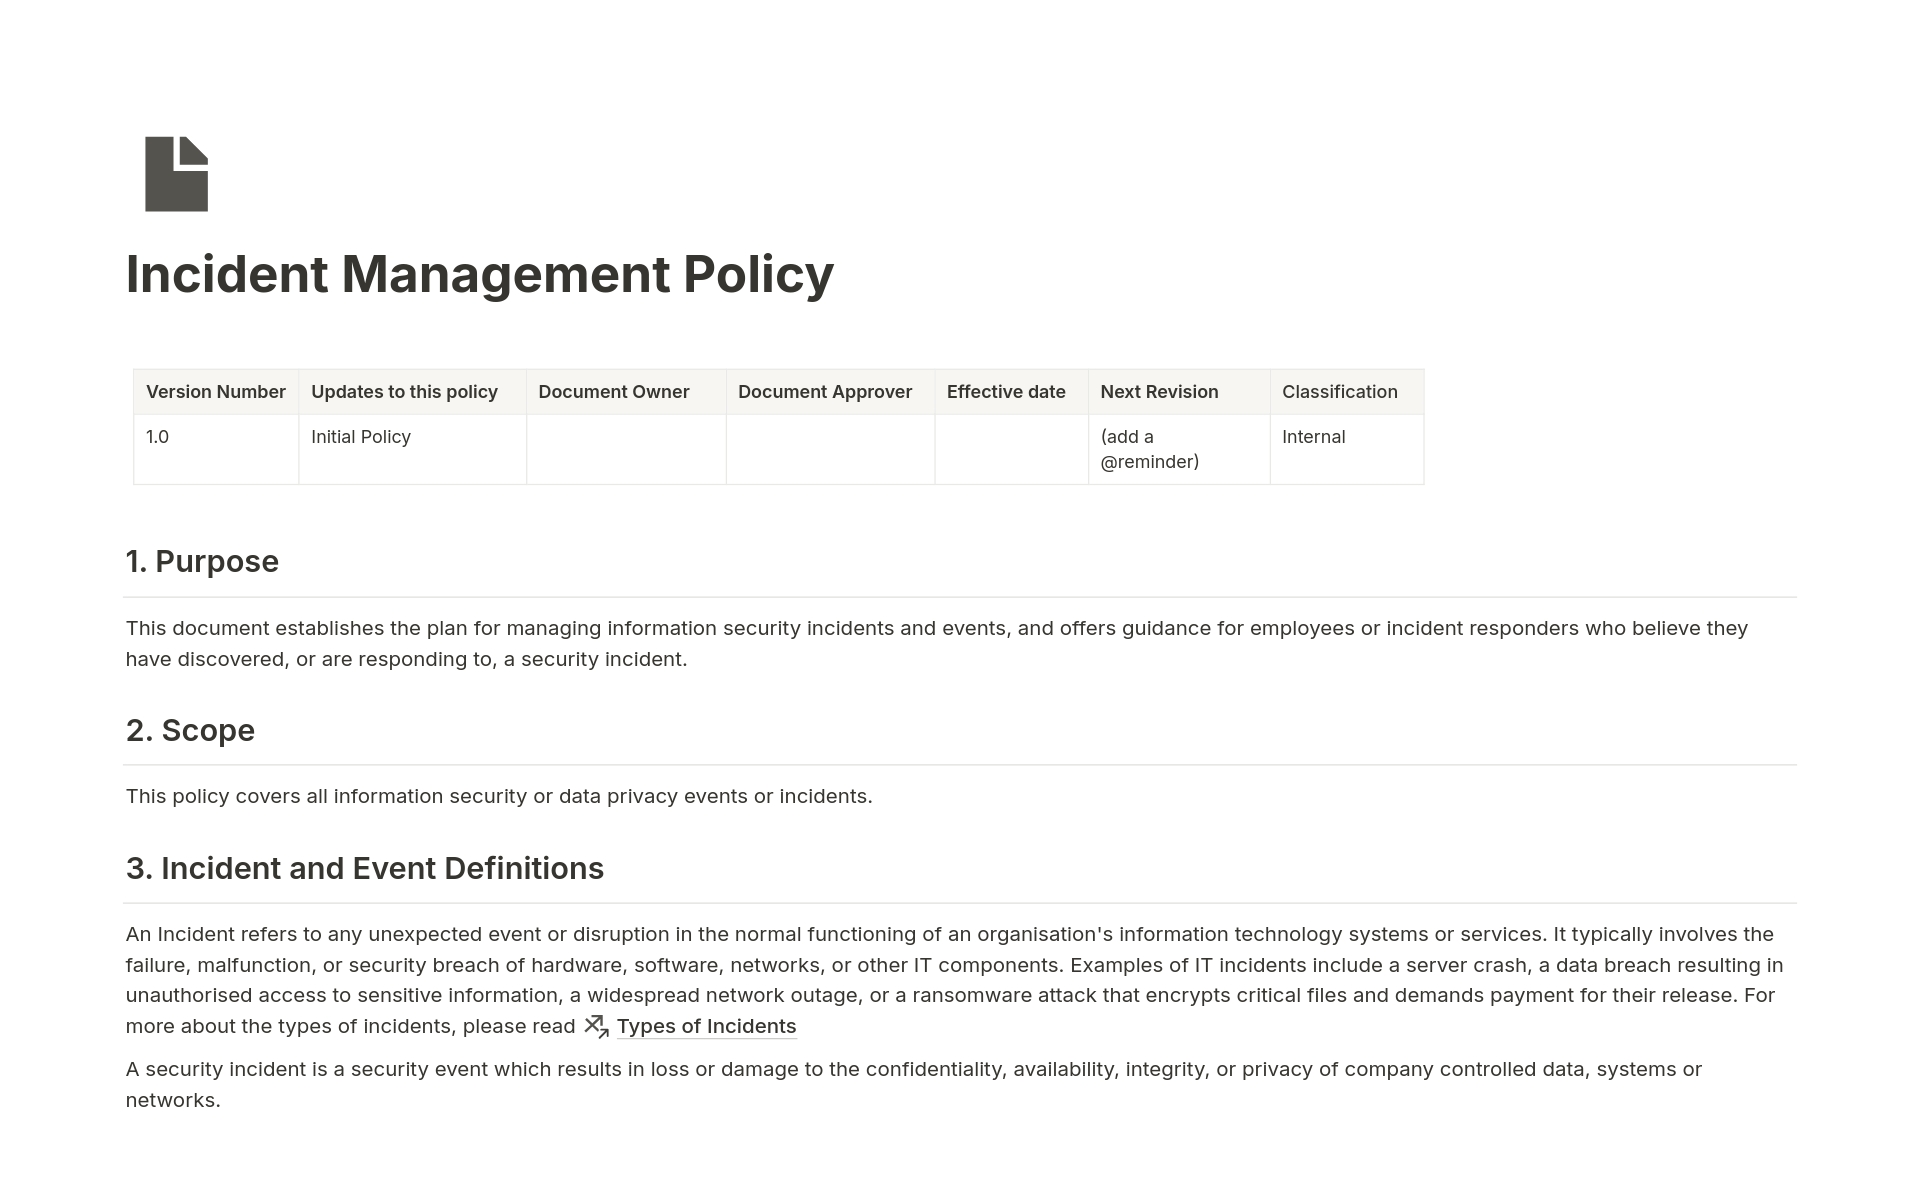 Streamline ISO27001 compliance towards Incident Management with our Notion template! Effortlessly manage incidents & empower staff with Apple Shortcut submission. Meet ISO controls & enhance security posture in one centralised hub. Revolutionise incident management today!